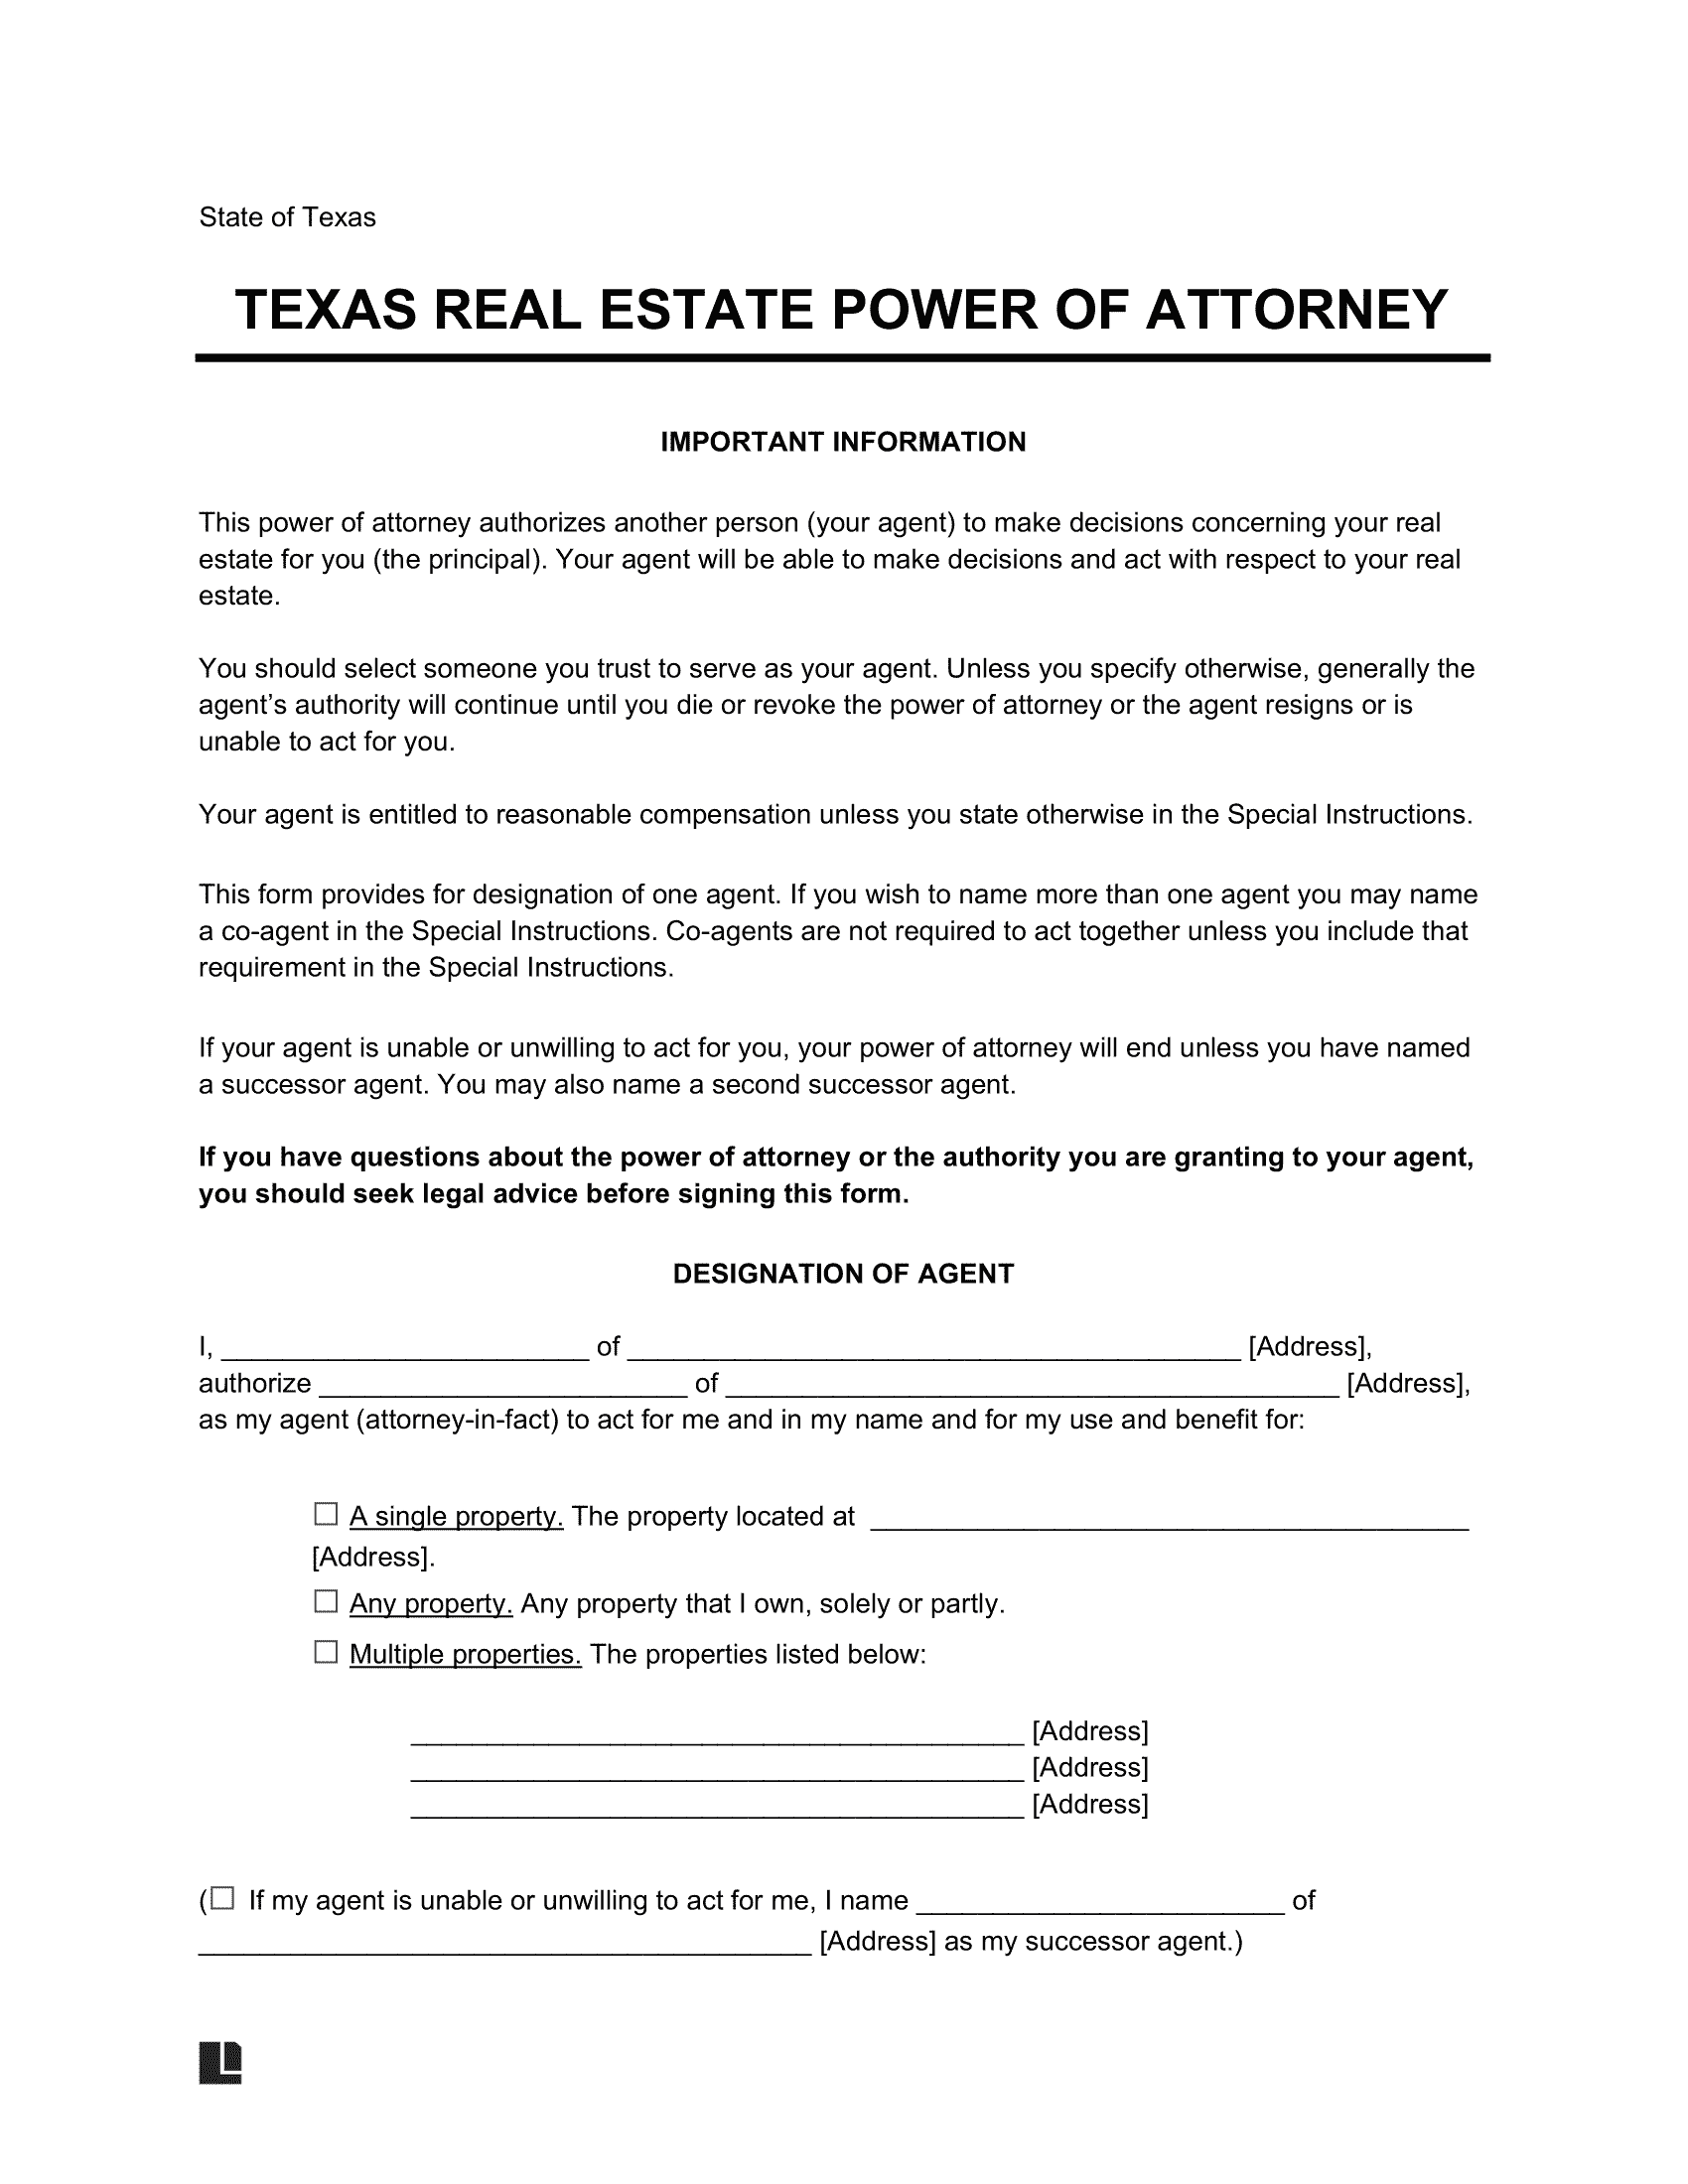 Texas Real Estate Power of Attorney Form